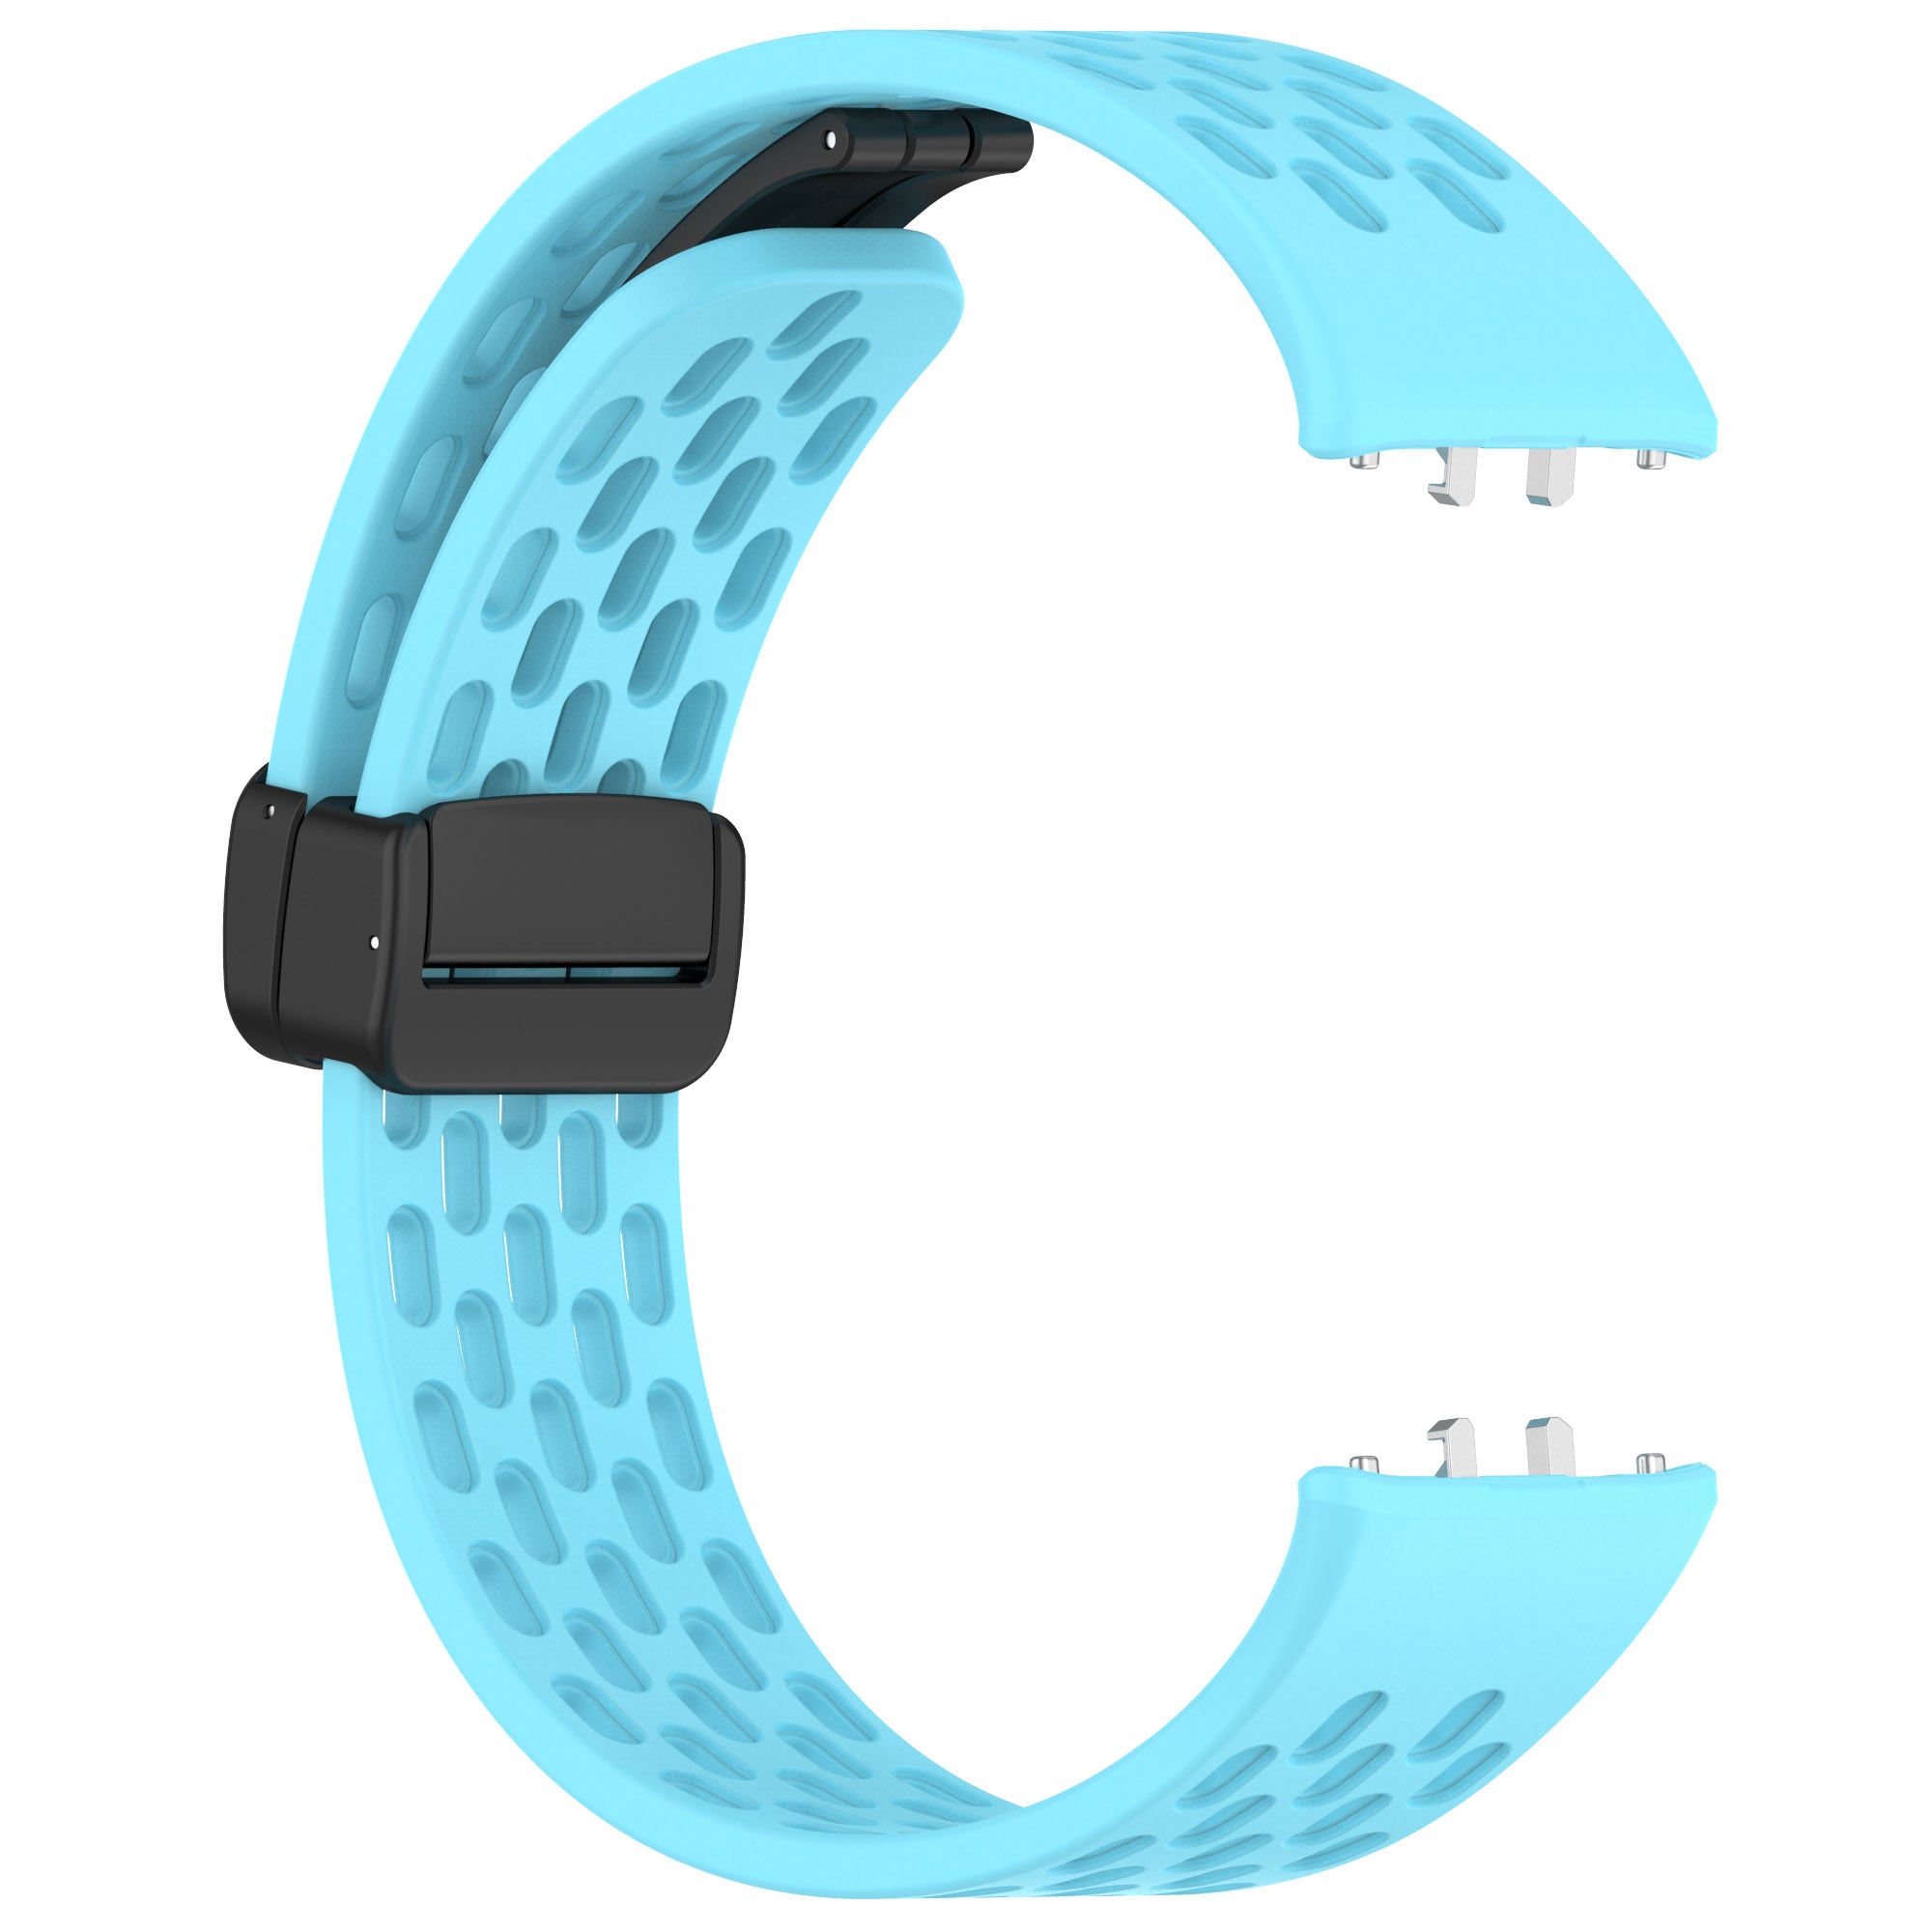 Wrist Band for Samsung Galaxy Fit3 R930 Magnetic Silicone Smartwatch Bracelet Strap - Blue